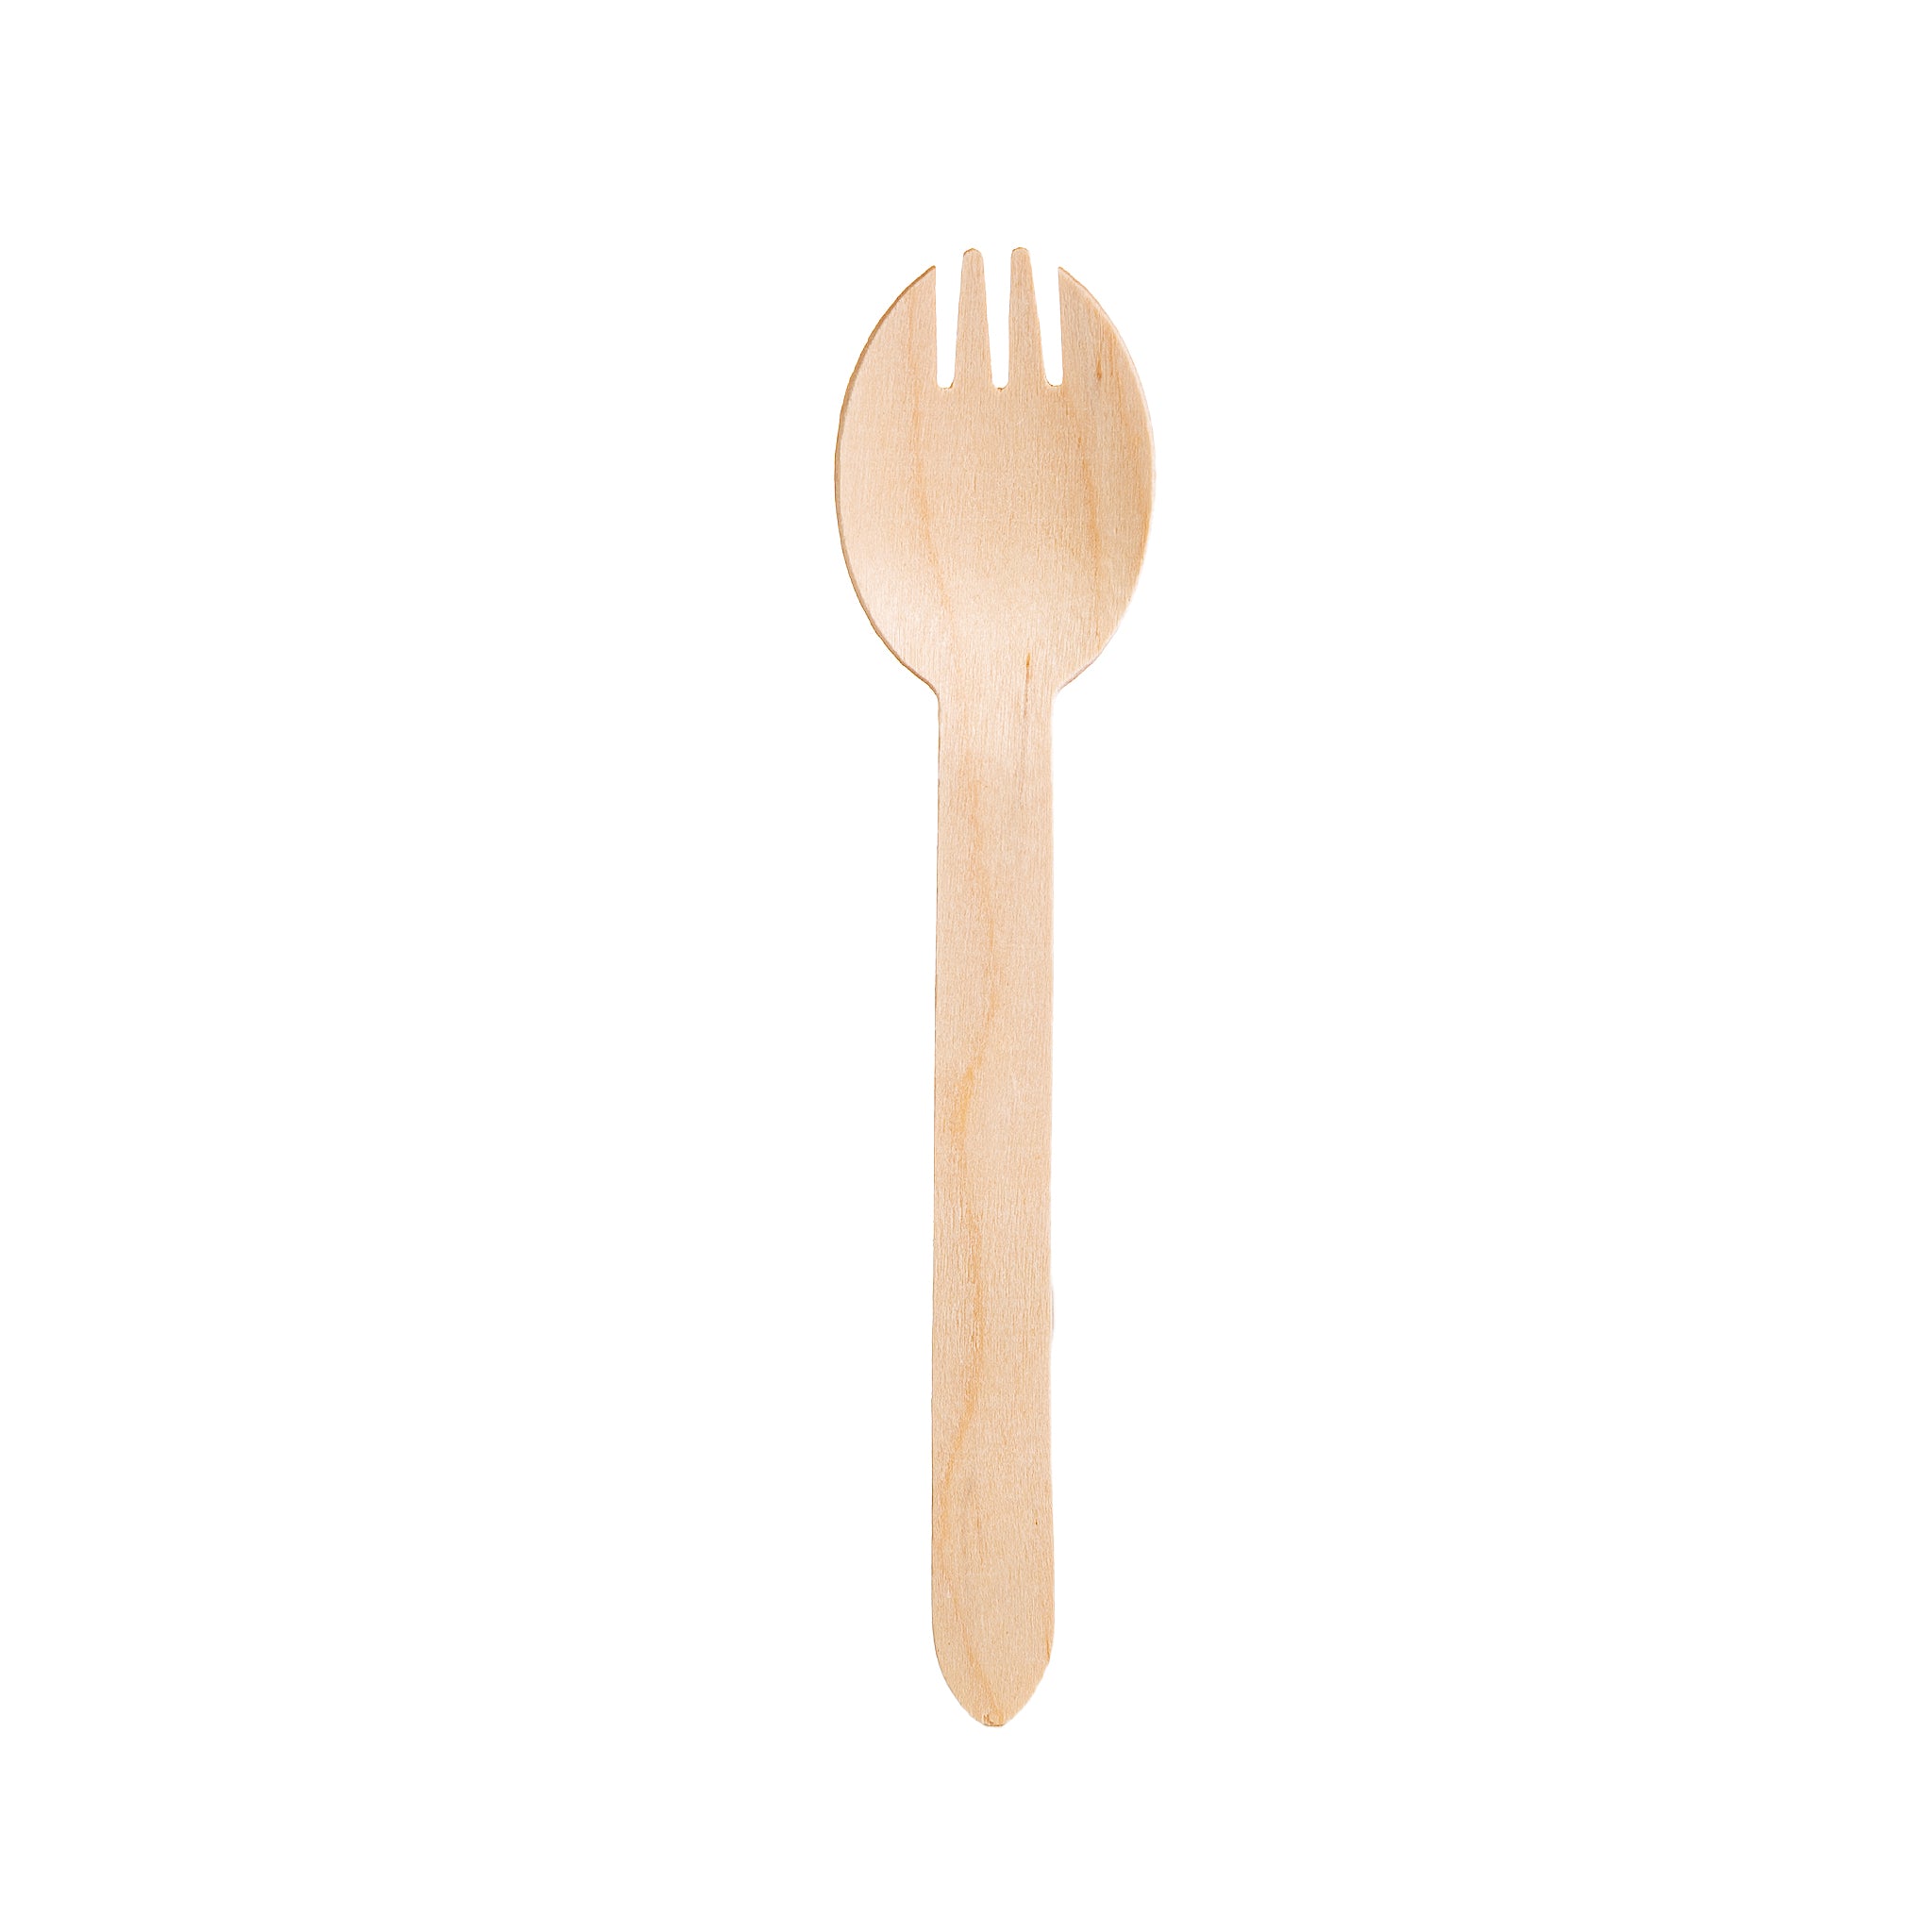 WoodU Disposable Wooden Sporks 100 pcs All Natural Eco-friendly Non-toxic